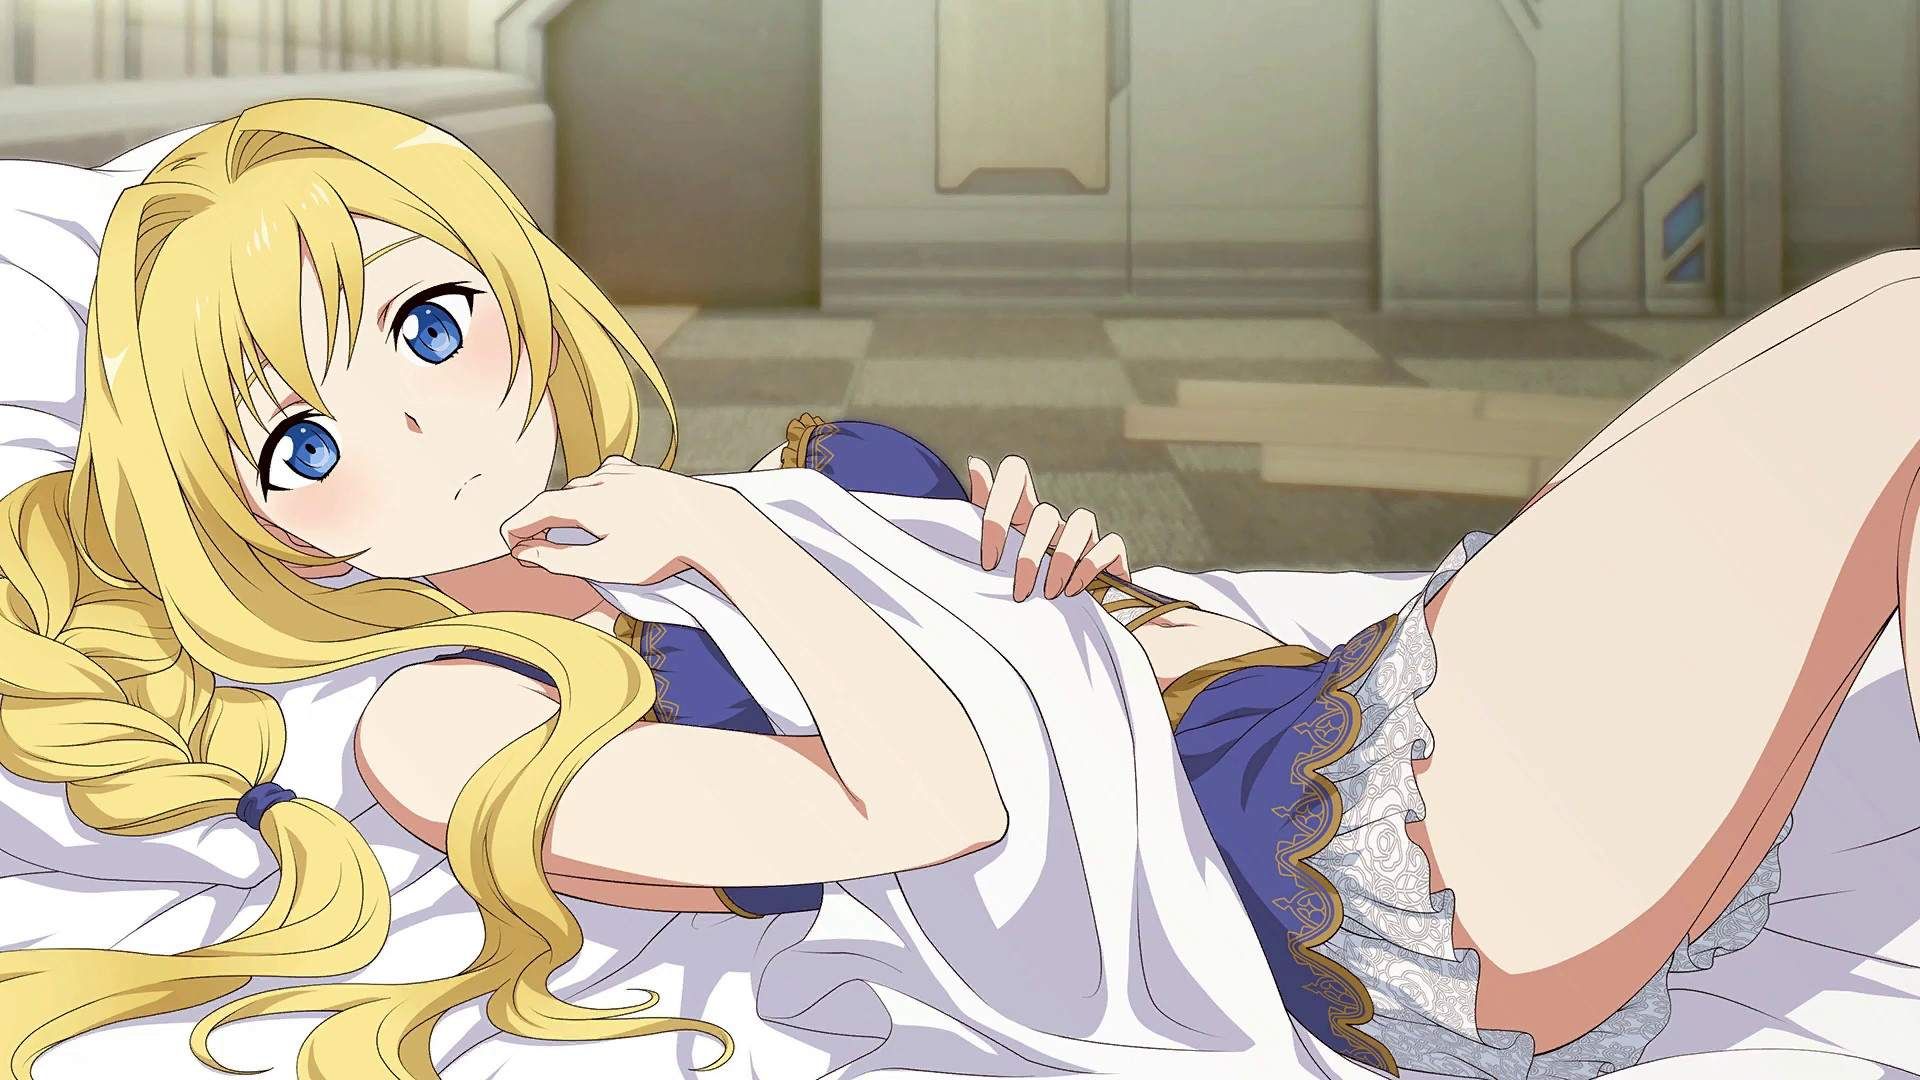 【Secondary Erotic】Here is the erotic image of Alice appearing in Sword Art Online 20